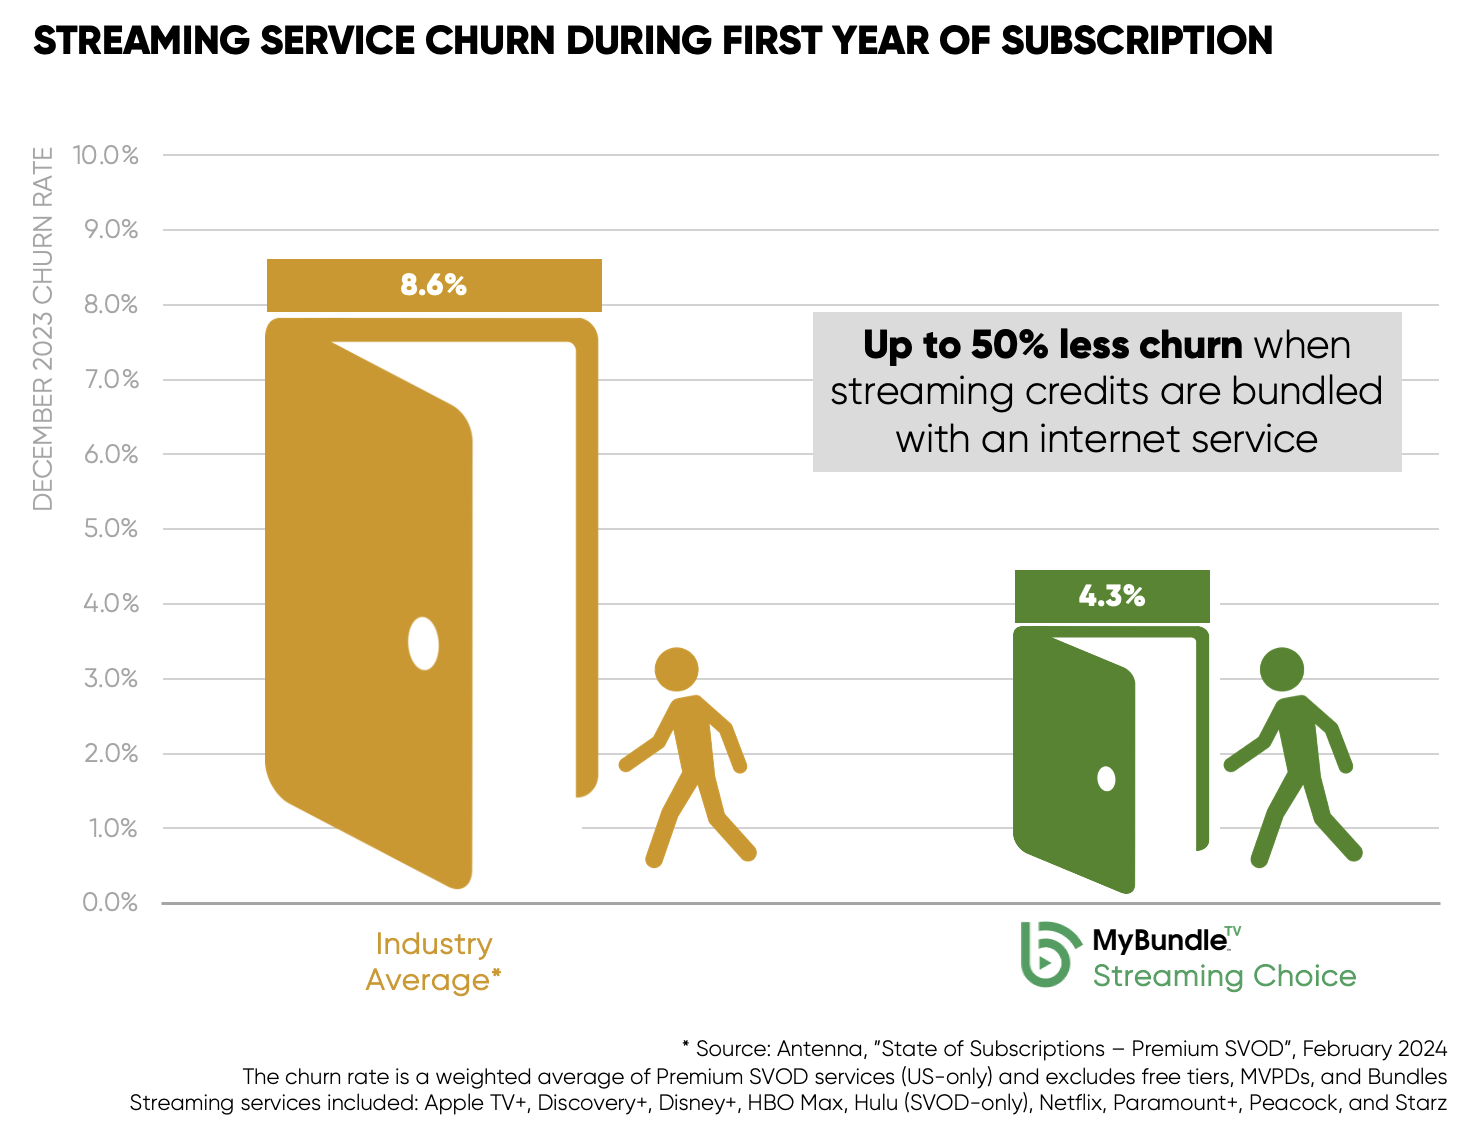 MYBUNDLE DATA SHOWS BUNDLING STREAMING CREDITS WITH BROADBAND REDUCES STREAMING SERVICE CHURN BY UP TO 50%